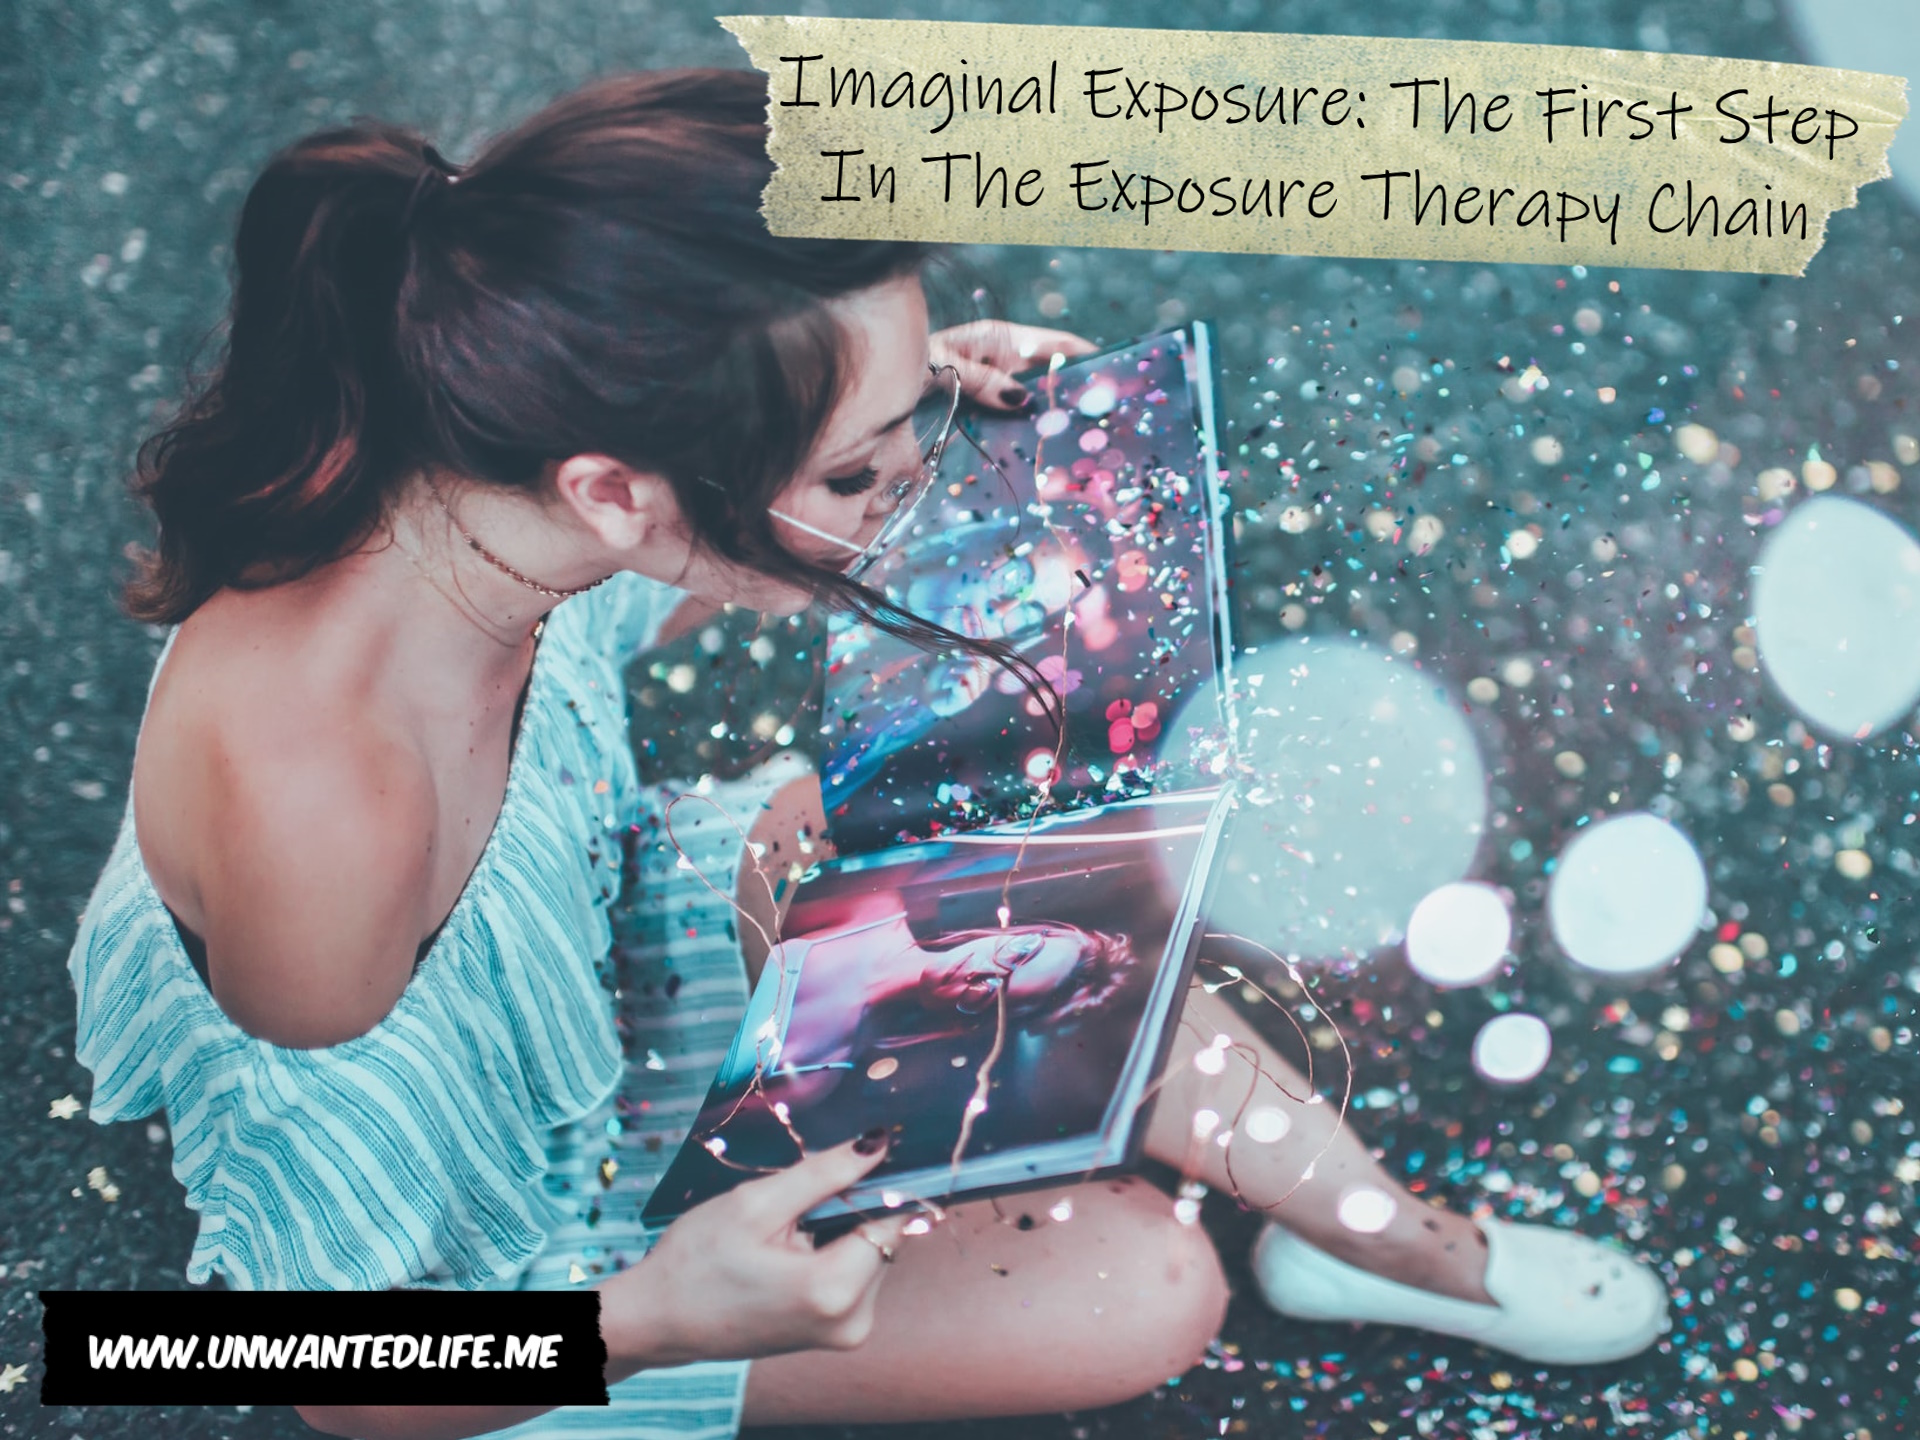 A photo of a woman looking through a photo book with glitter everywhere to represent the topic of the article - Imaginal Exposure: The First Step In The Exposure Therapy Chain